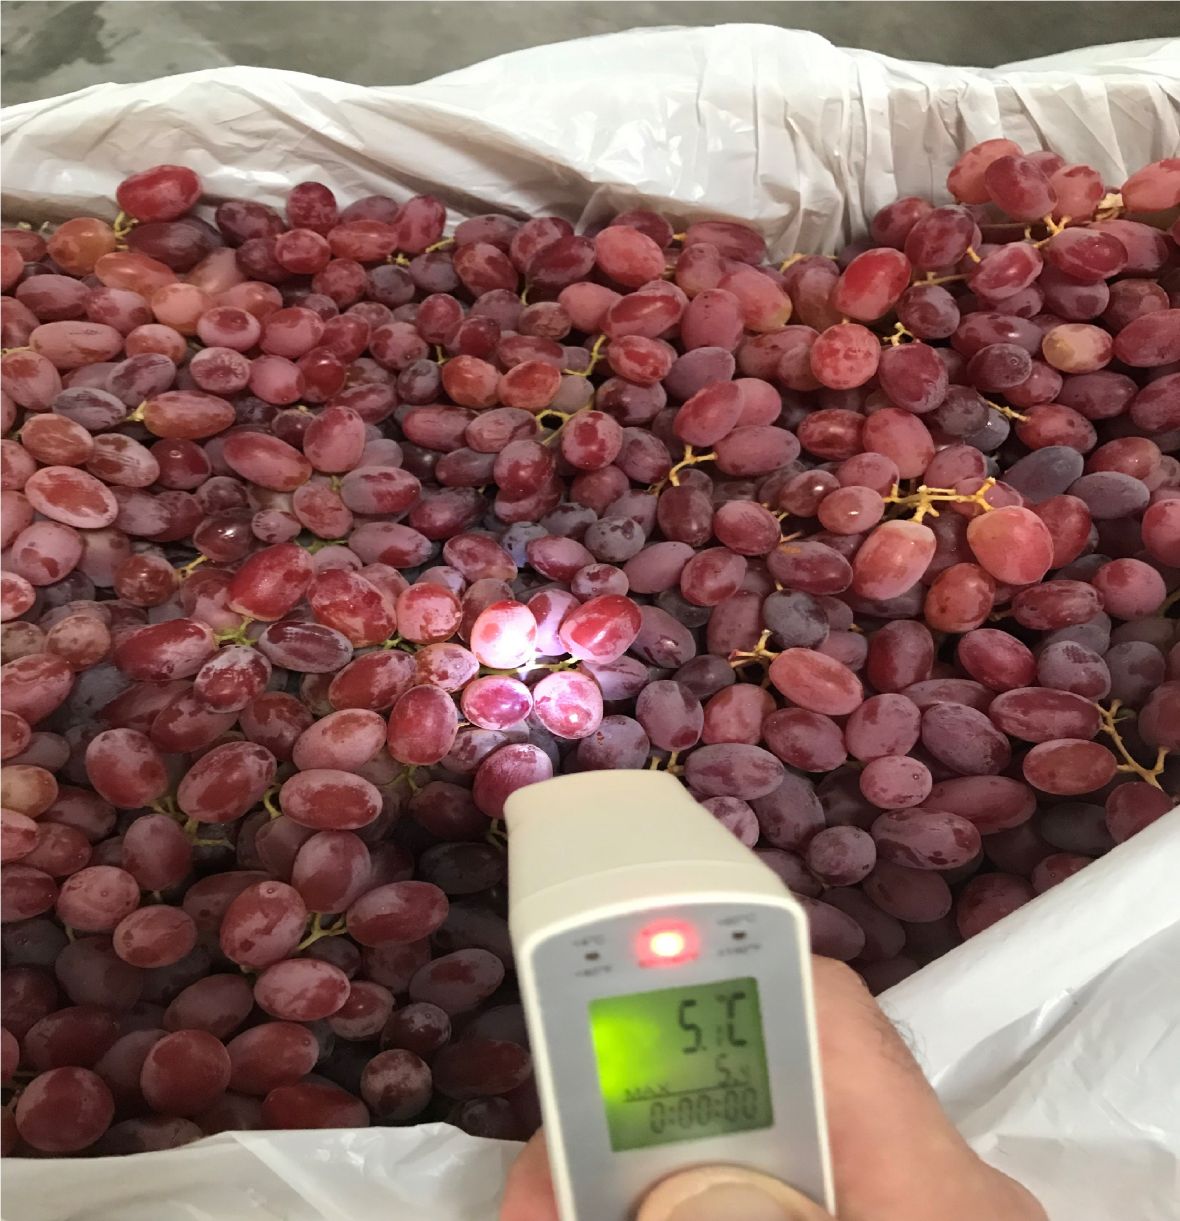 Red Table grape bunches with surface temperature measurement device